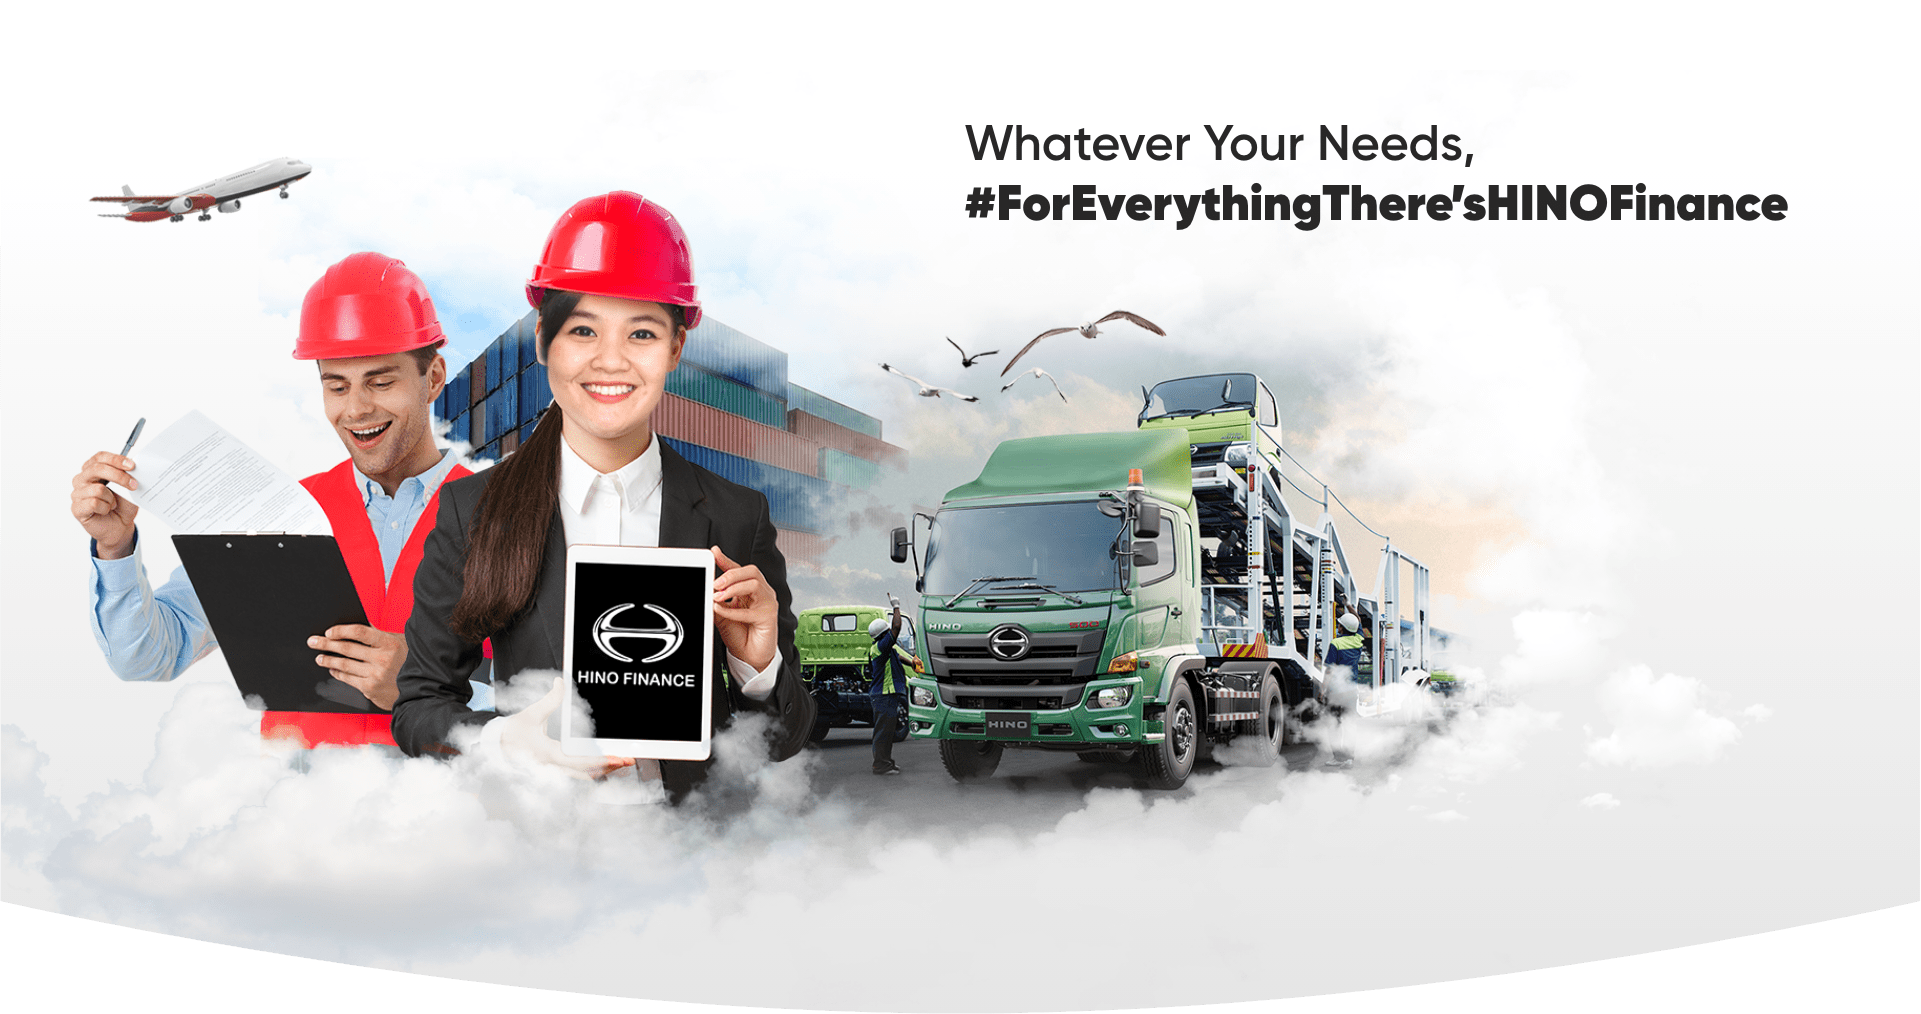 Whatever Your Needs, #Foreverythingthere'sHINOfinance